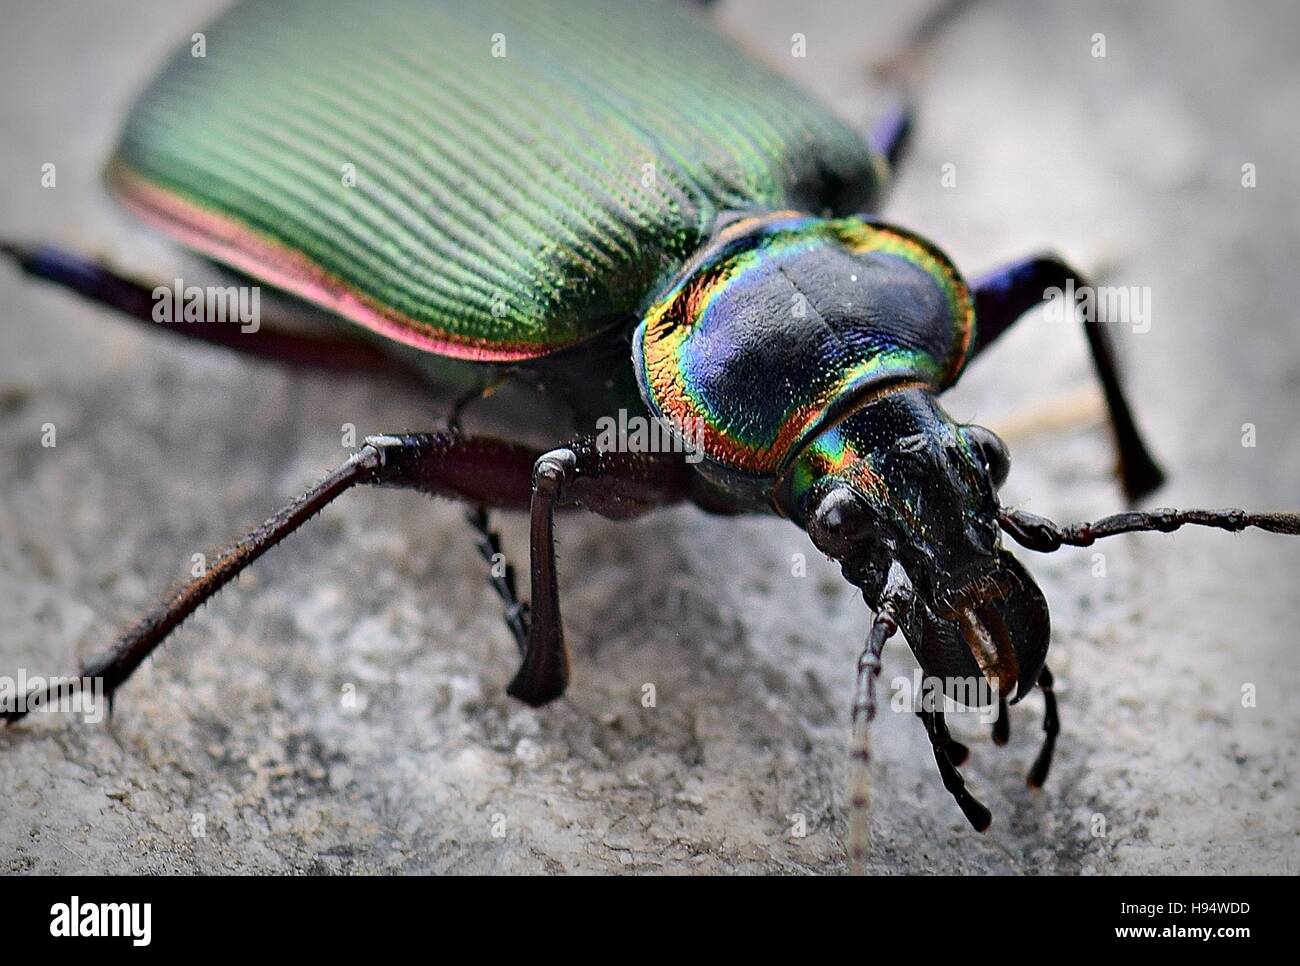 Close-up of the bright metallic coloration on a fiery searcher ground beetle at the Neosho National Fish Hatchery October 24, 2016 in Neosho, Missouri. Stock Photo